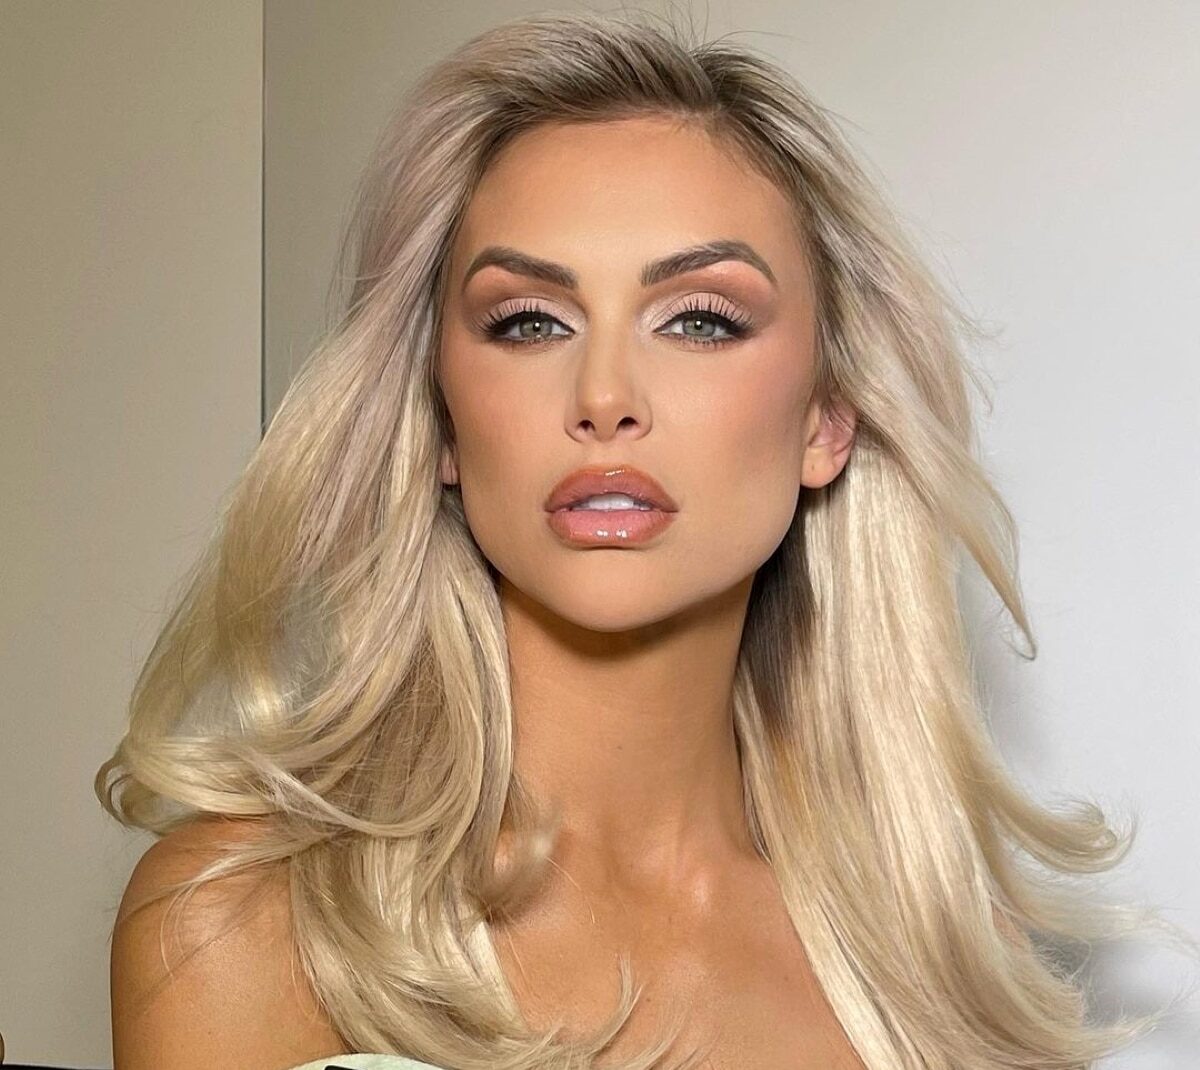 Pump Rules’ Lala Kent Apologizes to Fans, Says Season 11 Was “Most Difficult” She’s “Ever Had” and Social Media Comments Made Her “Resent" The "Audience,” Plus Hints She’s Now Glad She Can’t Film with Daughter